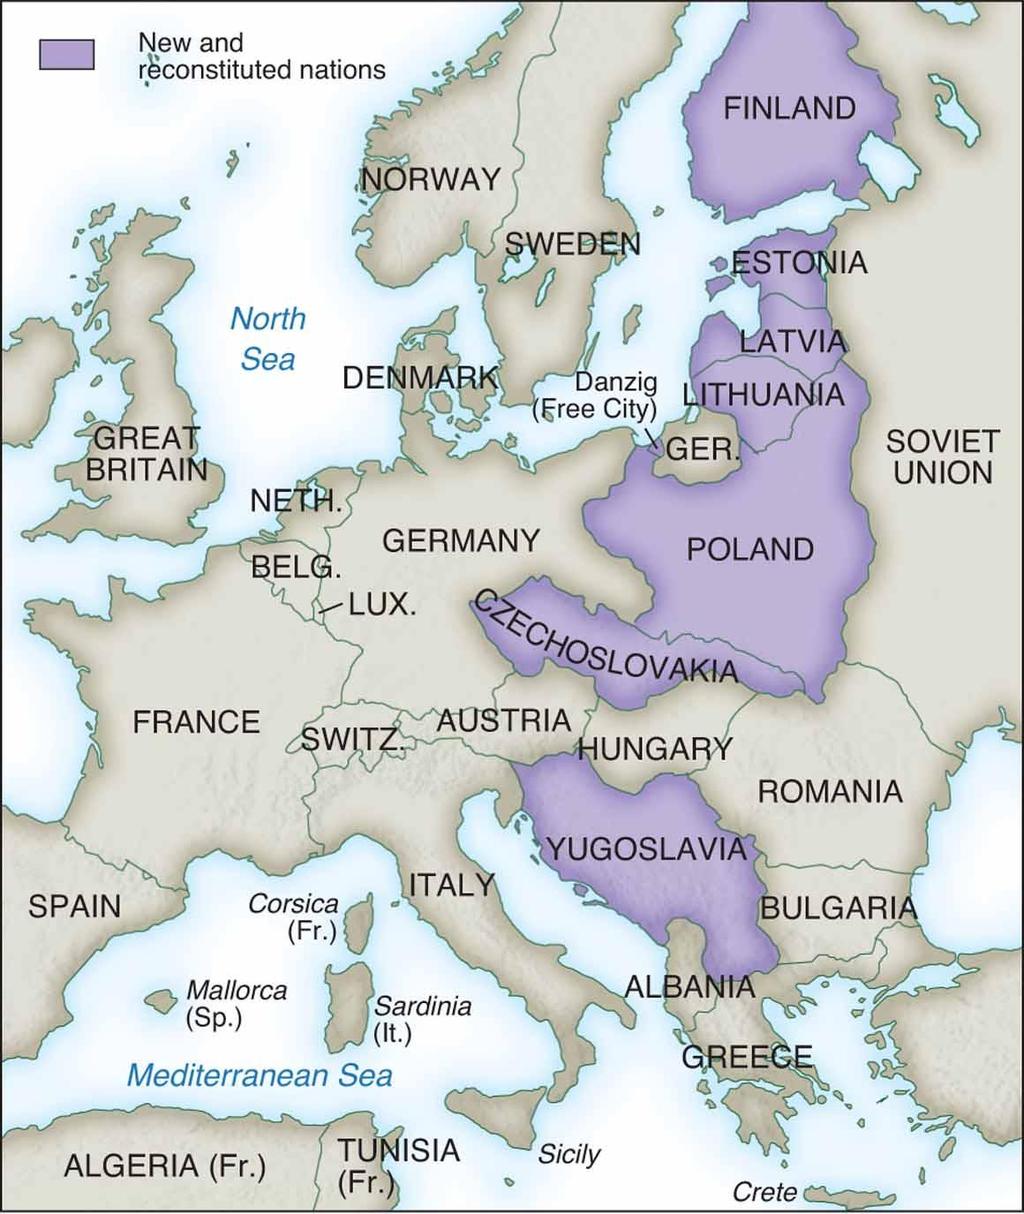 Europe After the